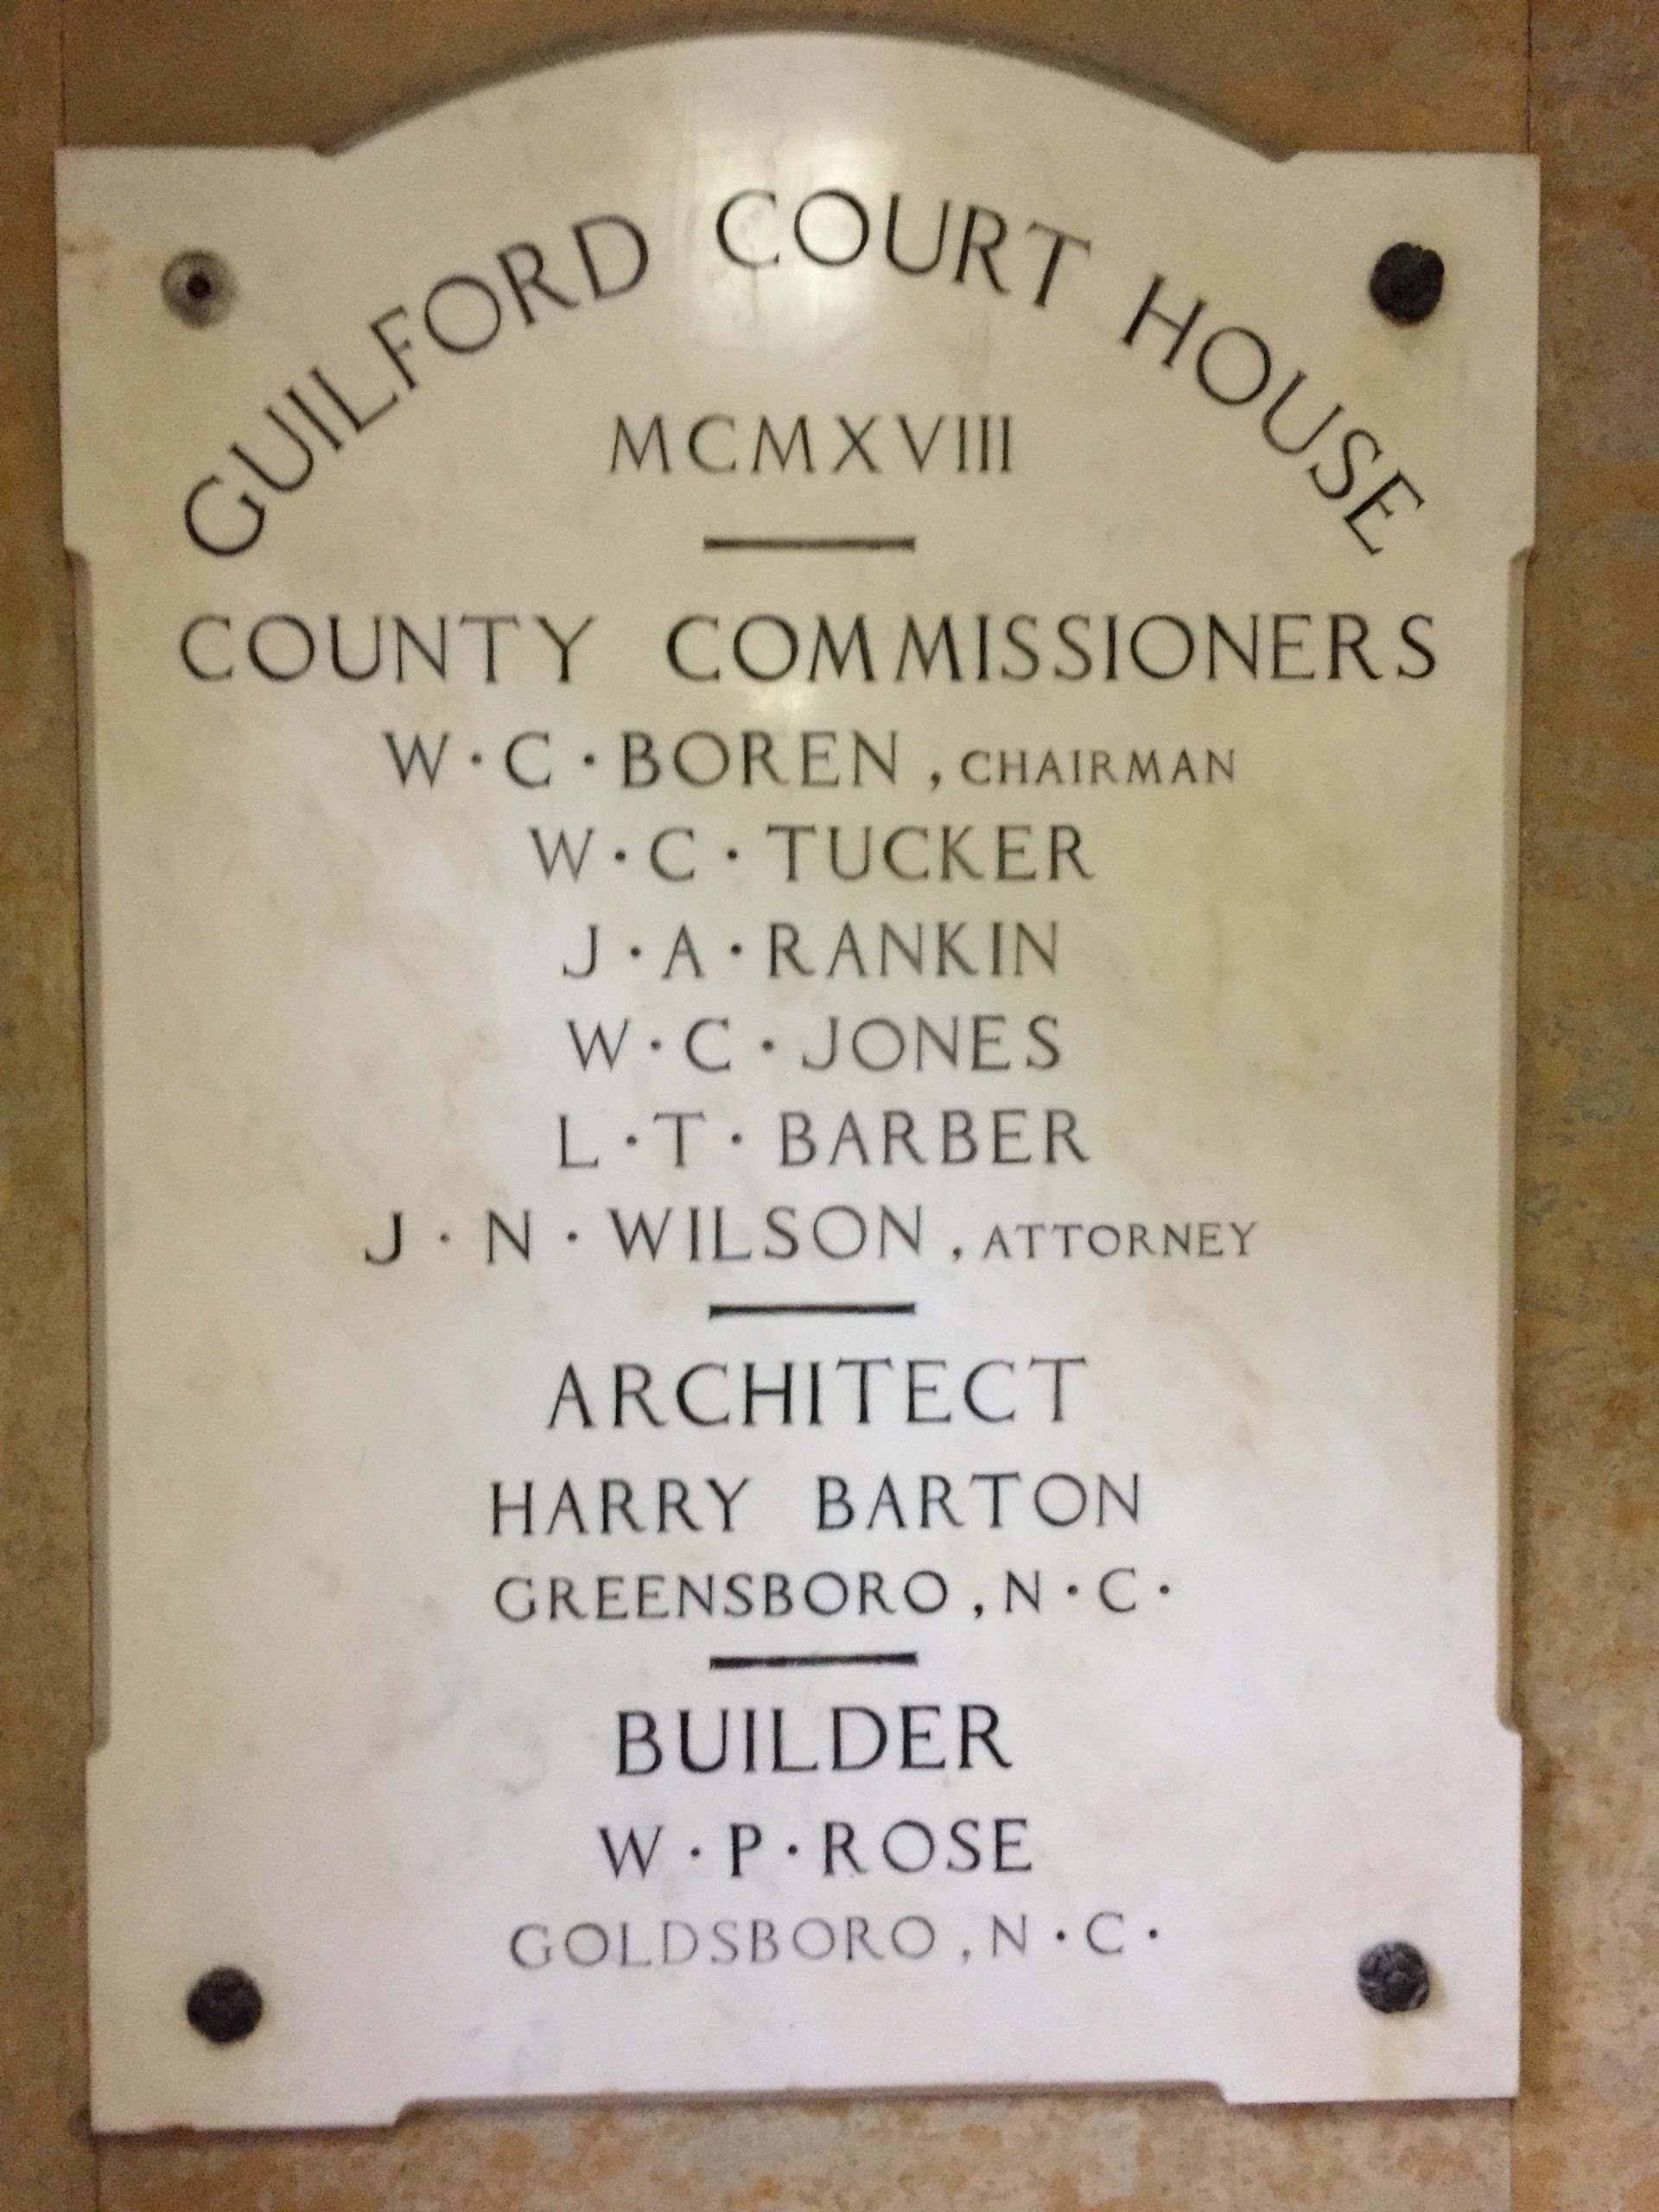 Old Guilford County Courthouse Celebrates a Century of Service - Preservation Greensboro ...